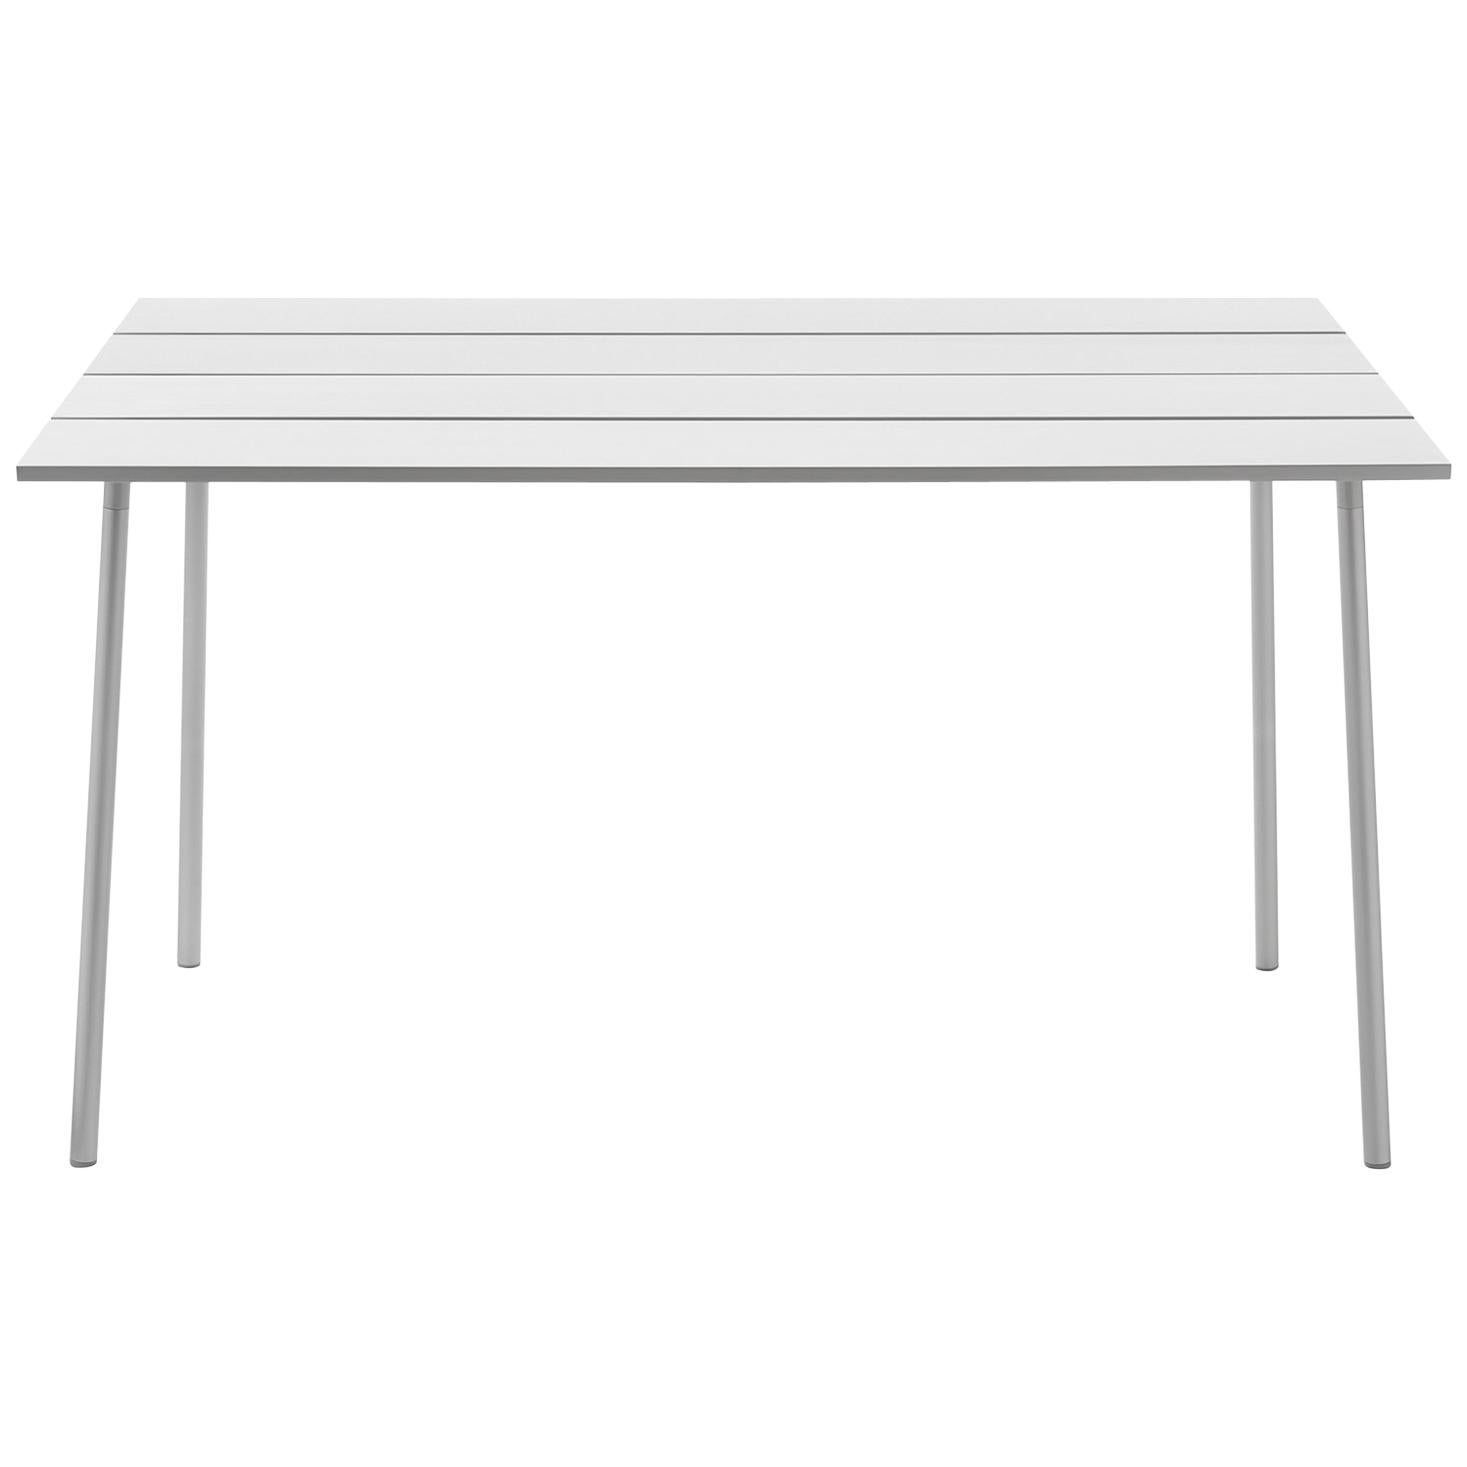 Emeco Run Large High Table in Clear Anodized Aluminum by Sam Hecht & Kim Colin For Sale